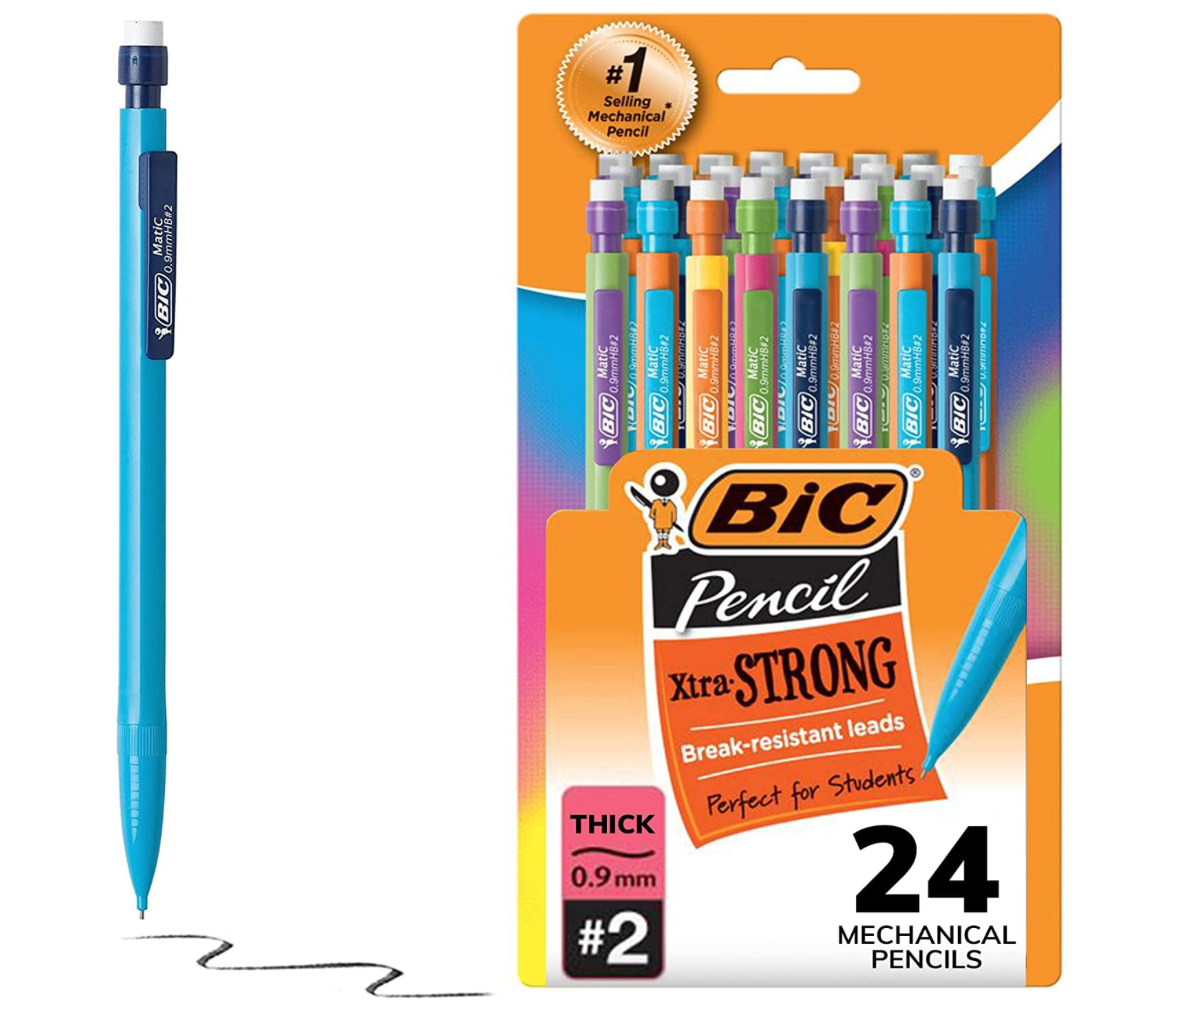 School Supplies Under $5: Wescott, Bic, and More - The Krazy Coupon  Lady